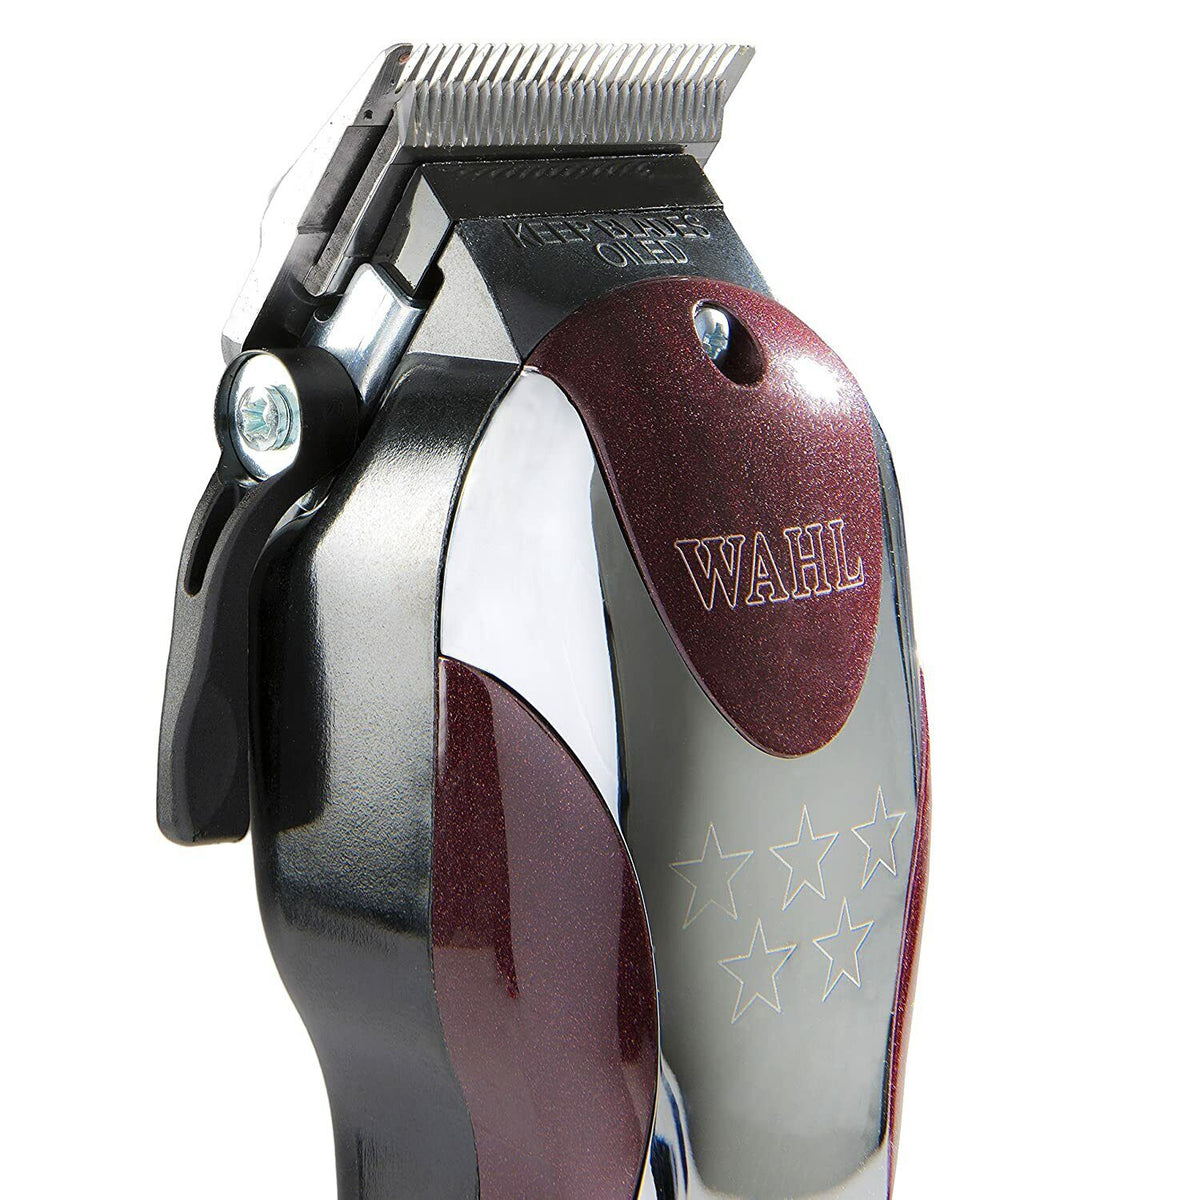  Wahl Professional 5-Star Magic Clip #845 – Great for